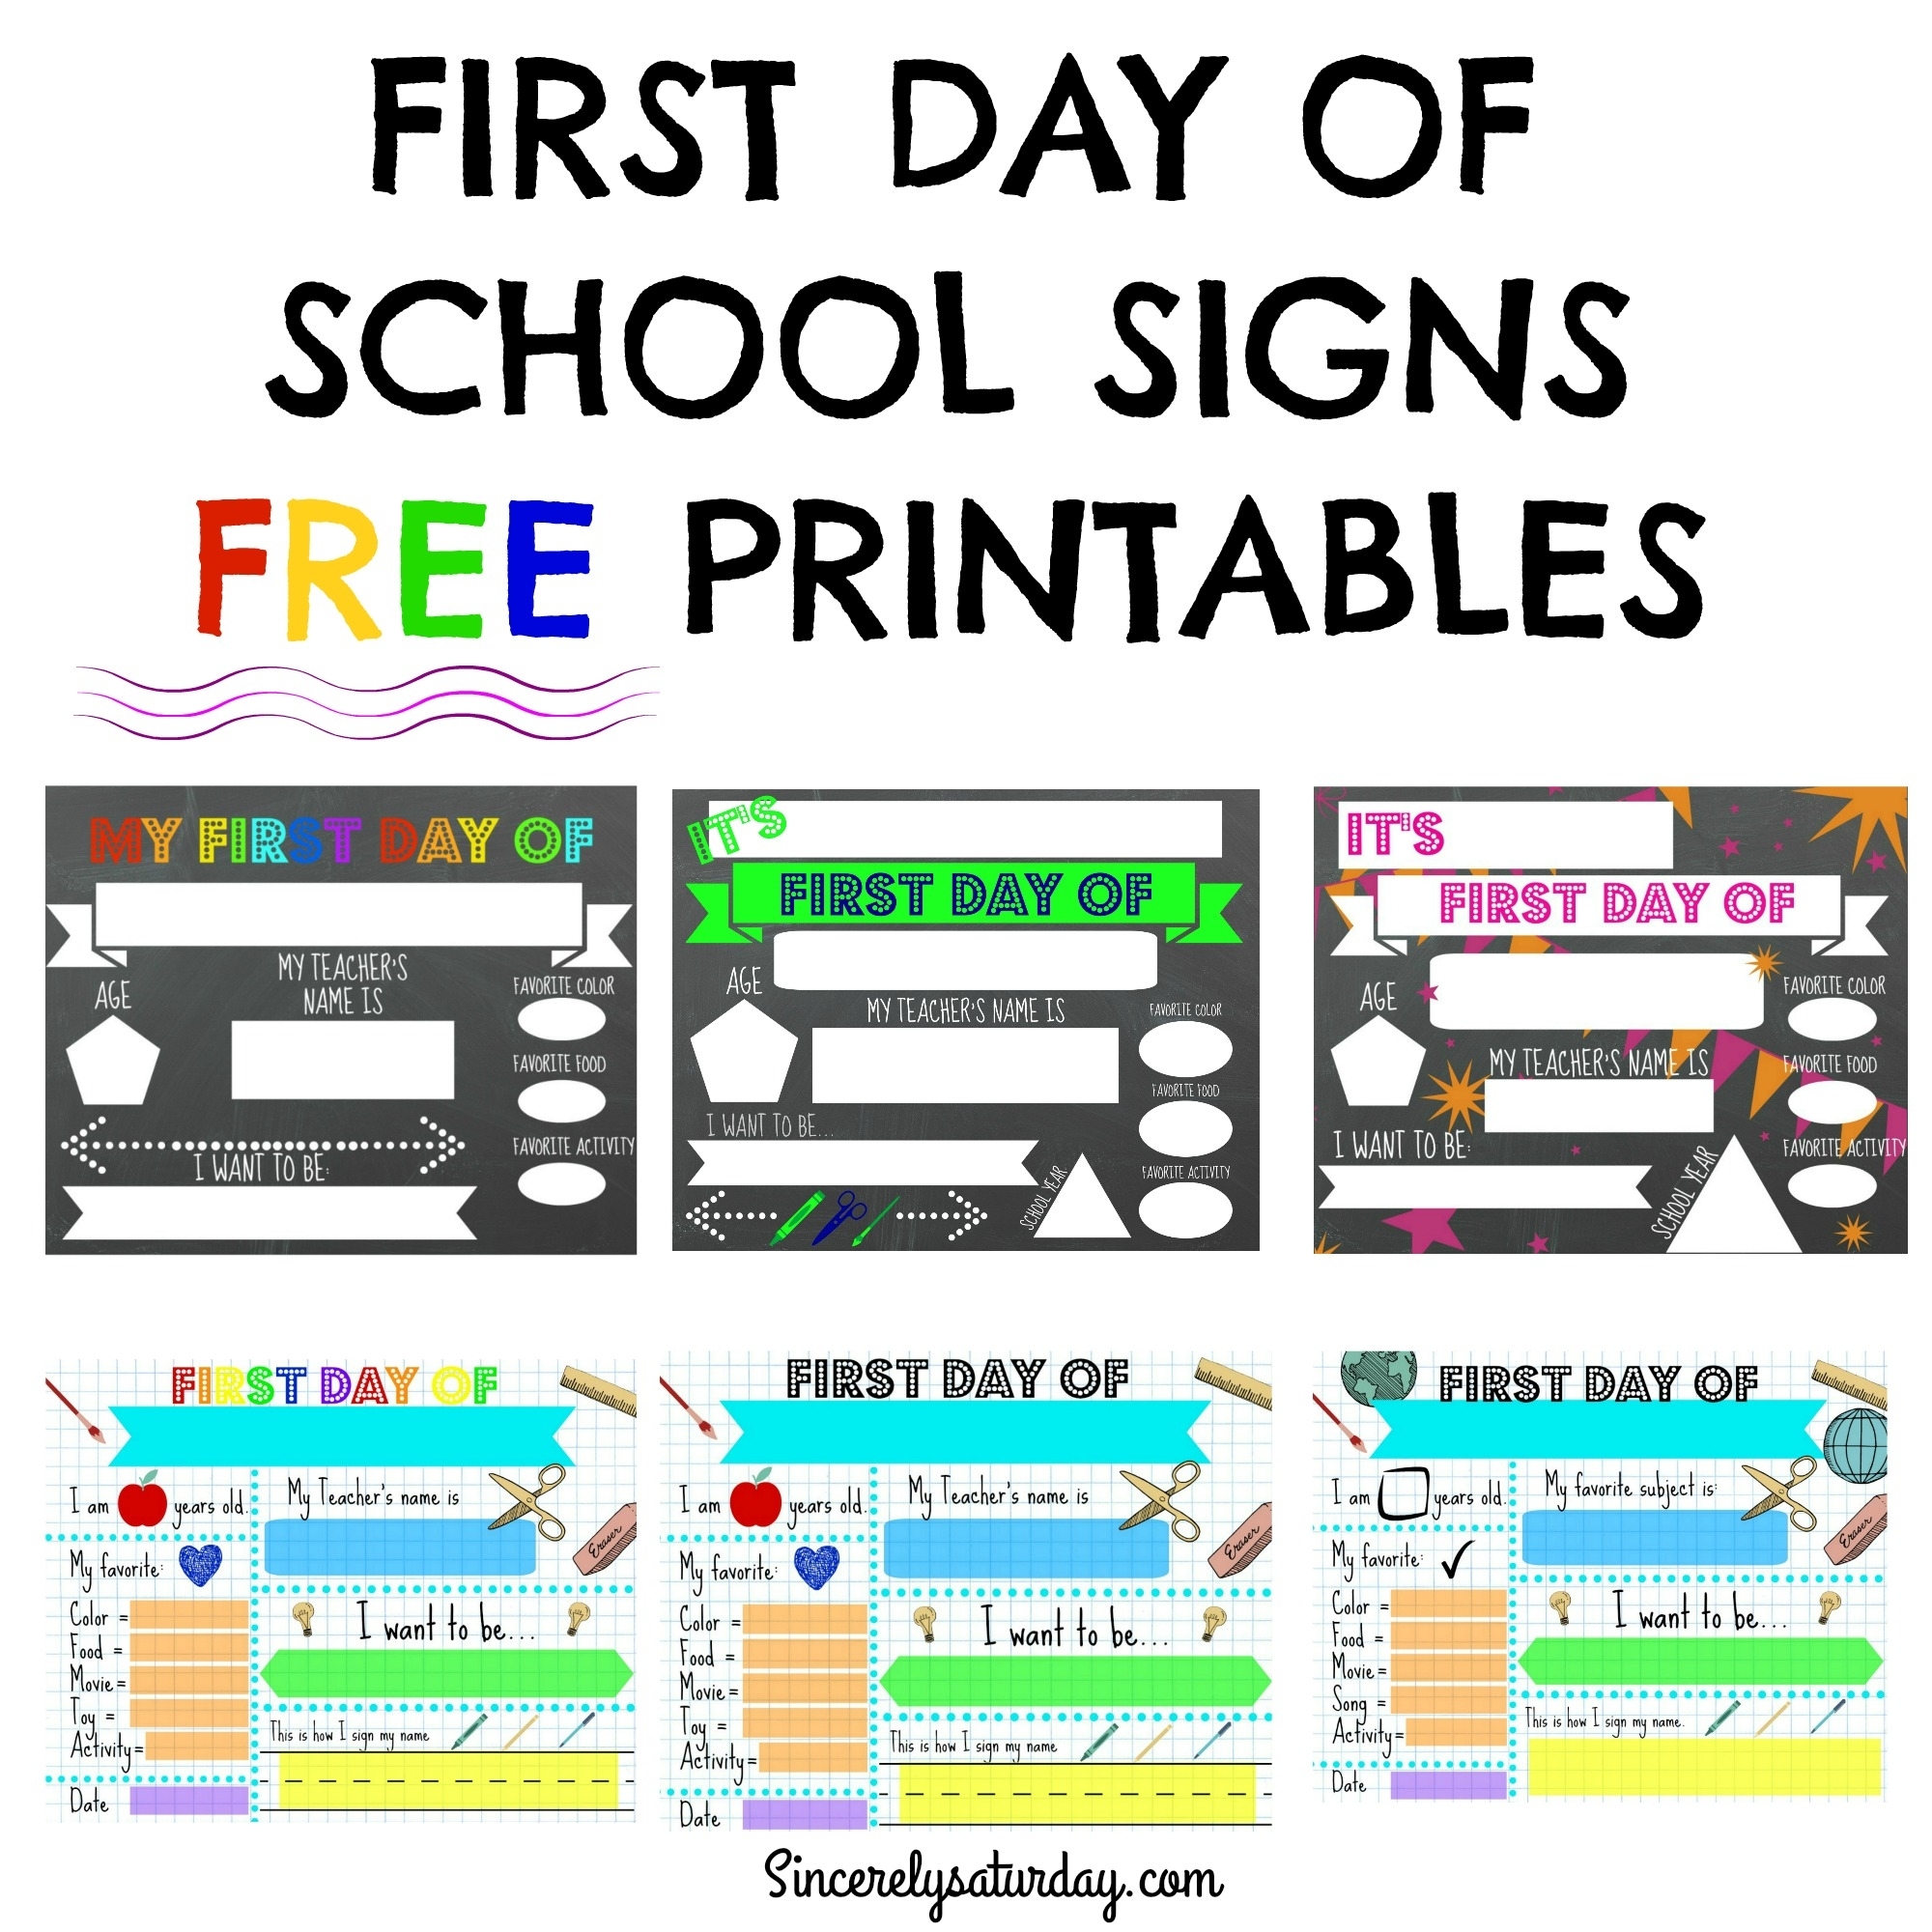 sincerelysaturday-com-free-printable-first-day-of-school-signs